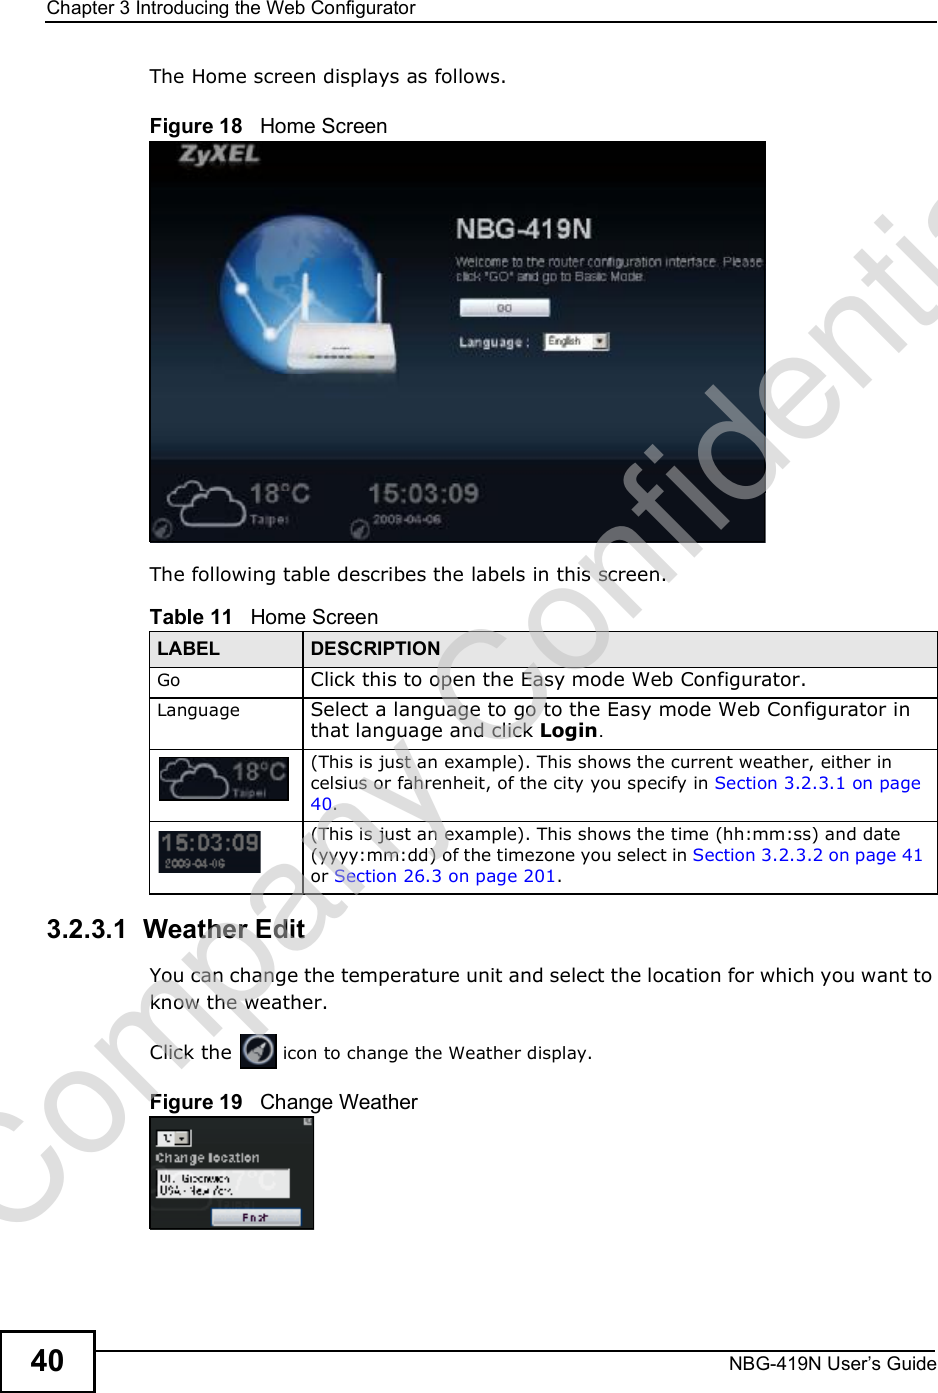 Chapter 3Introducing the Web ConfiguratorNBG-419N User s Guide40The Home screen displays as follows.Figure 18   Home ScreenThe following table describes the labels in this screen.3.2.3.1  Weather EditYou can change the temperature unit and select the location for which you want to know the weather.Click the   icon to change the Weather display.Figure 19   Change WeatherTable 11   Home ScreenLABEL DESCRIPTIONGo Click this to open the Easy mode Web Configurator. Language Select a language to go to the Easy mode Web Configurator in that language and click Login.(This is just an example). This shows the current weather, either in celsius or fahrenheit, of the city you specify in Section 3.2.3.1 on page 40.(This is just an example). This shows the time (hh:mm:ss) and date (yyyy:mm:dd) of the timezone you select in Section 3.2.3.2 on page 41 or Section 26.3 on page 201.Company Confidential